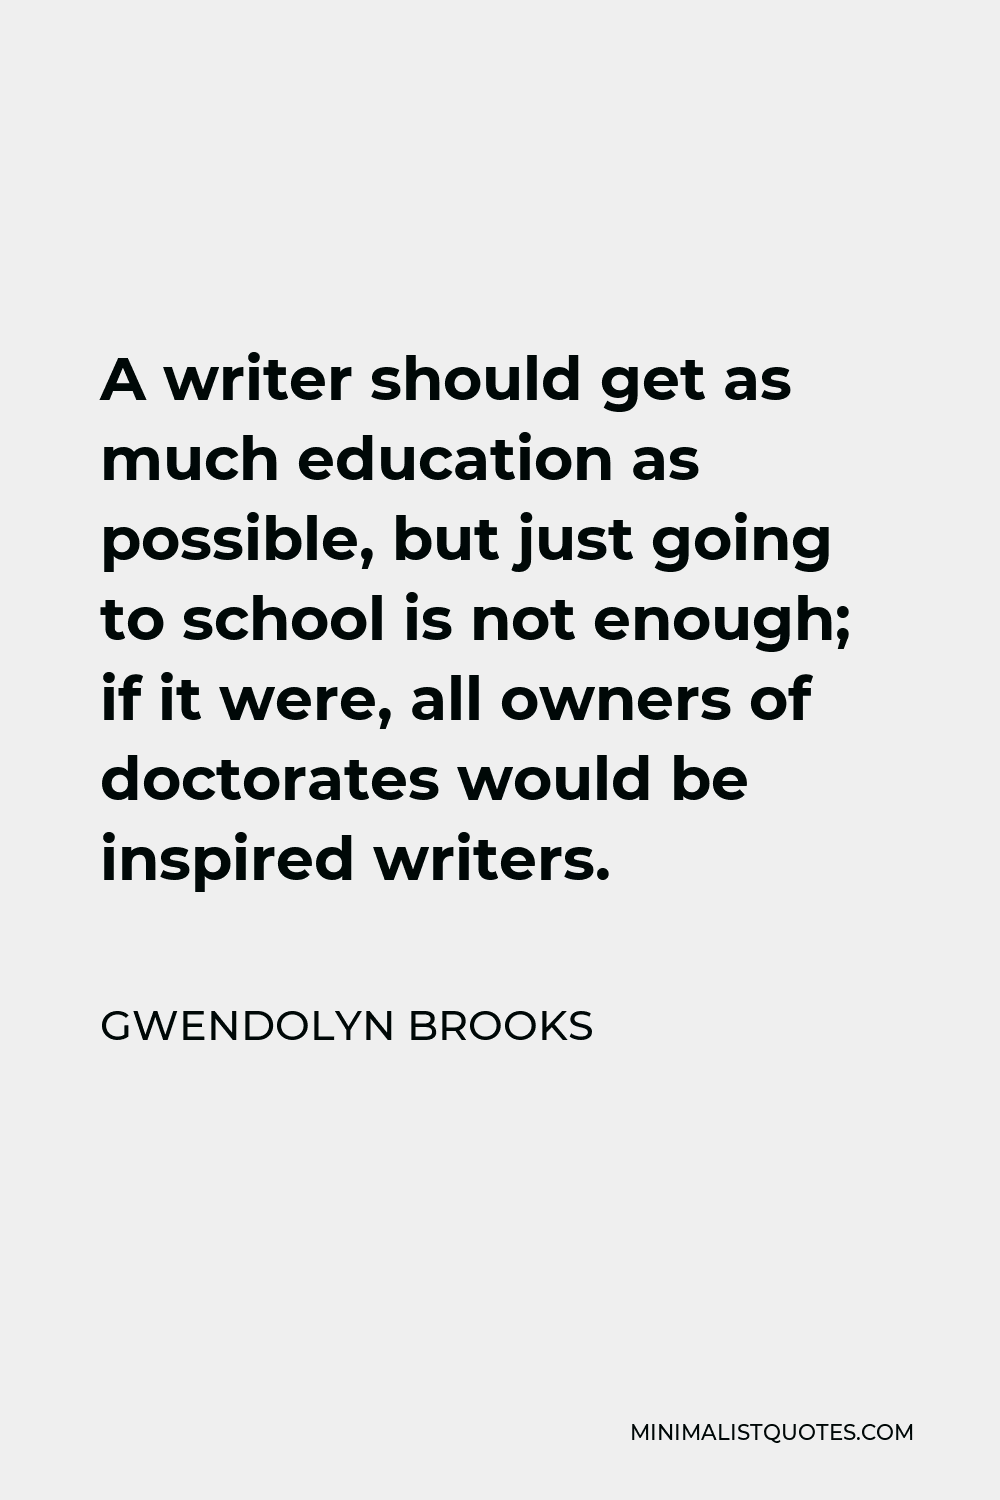 Gwendolyn Brooks Quote - A writer should get as much education as possible, but just going to school is not enough; if it were, all owners of doctorates would be inspired writers.